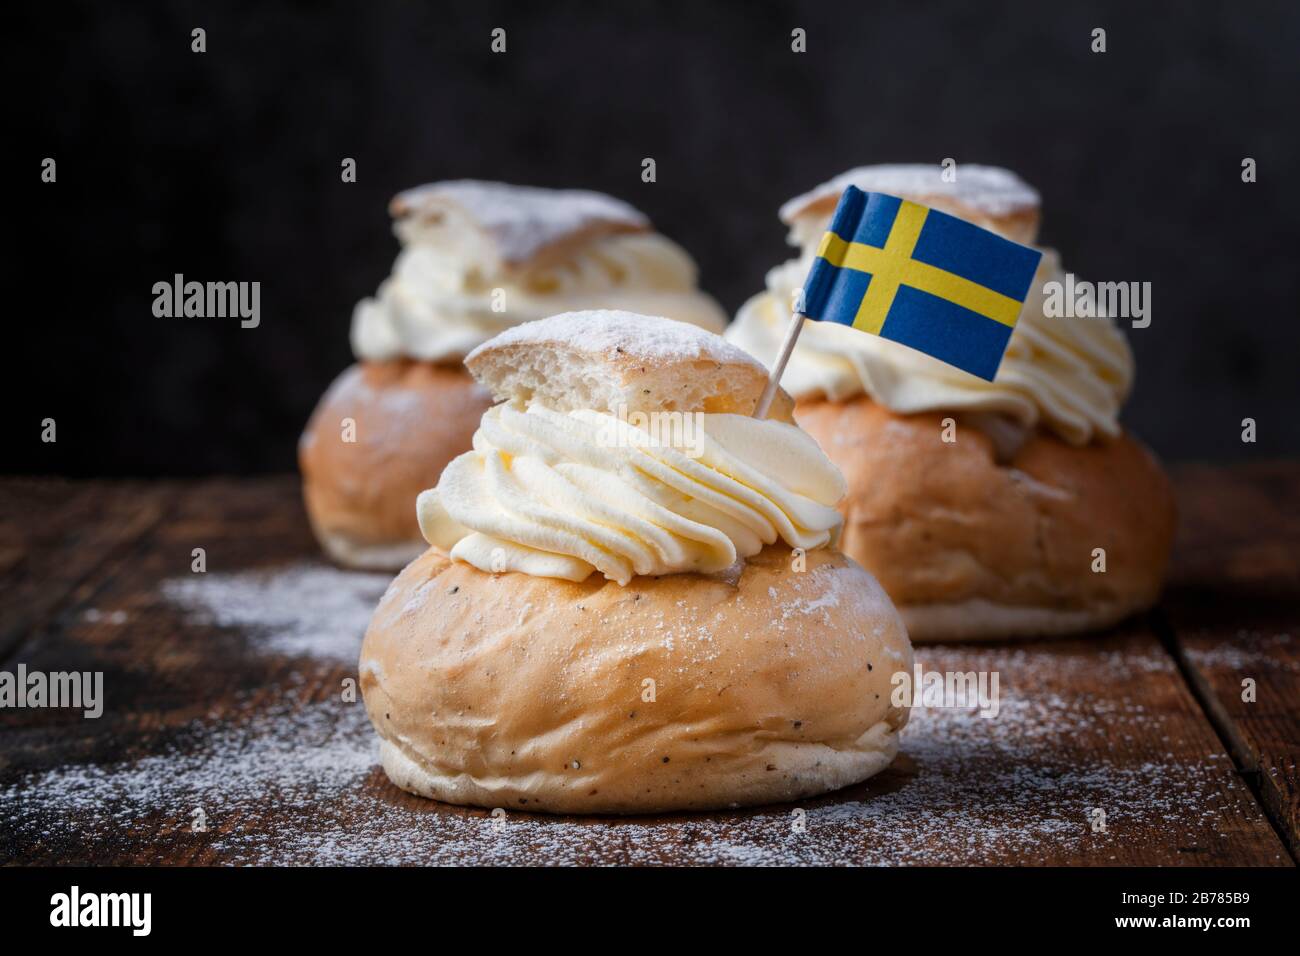 Semlor, fastelavnsbolle, fastlagsbulle on dark background.  Traditional scandinavian cream filled cardamom buns with almond paste.  Decorated with a S Stock Photo